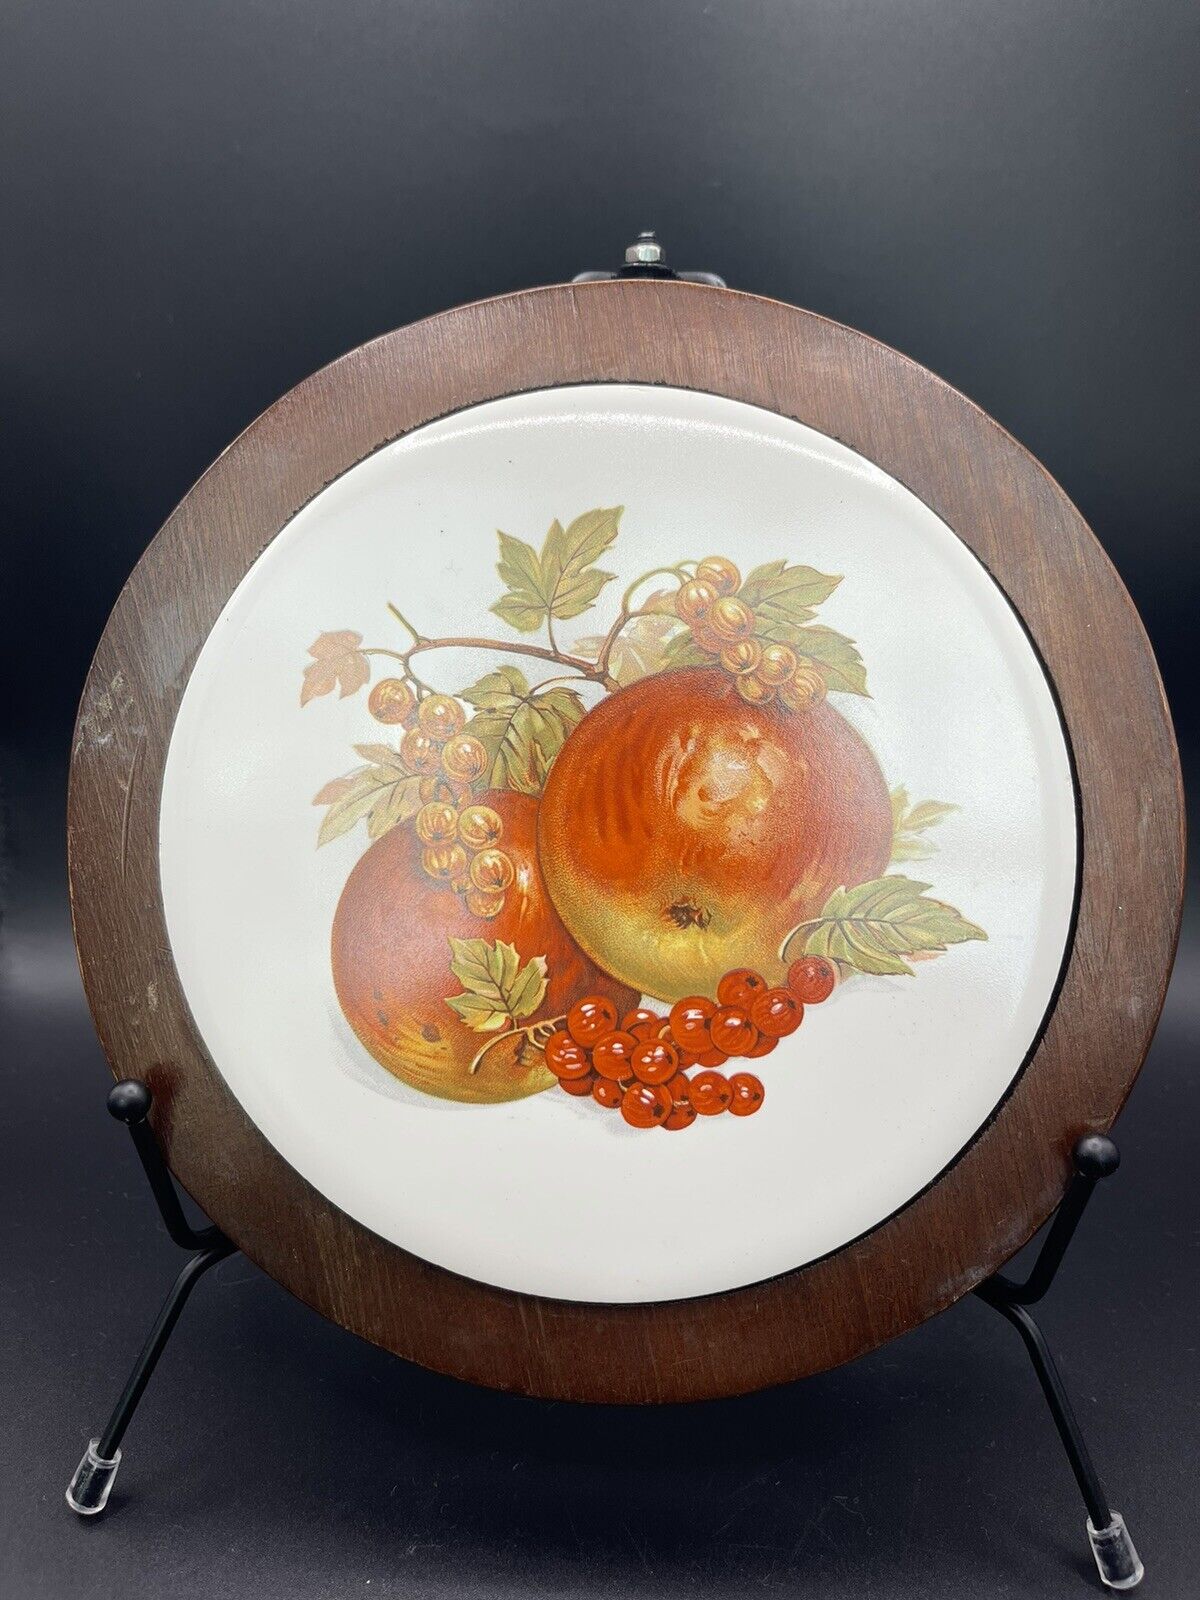 Vintage Trivet Wood And Ceramic Grapes And Apples Country Kitschy Kitchen